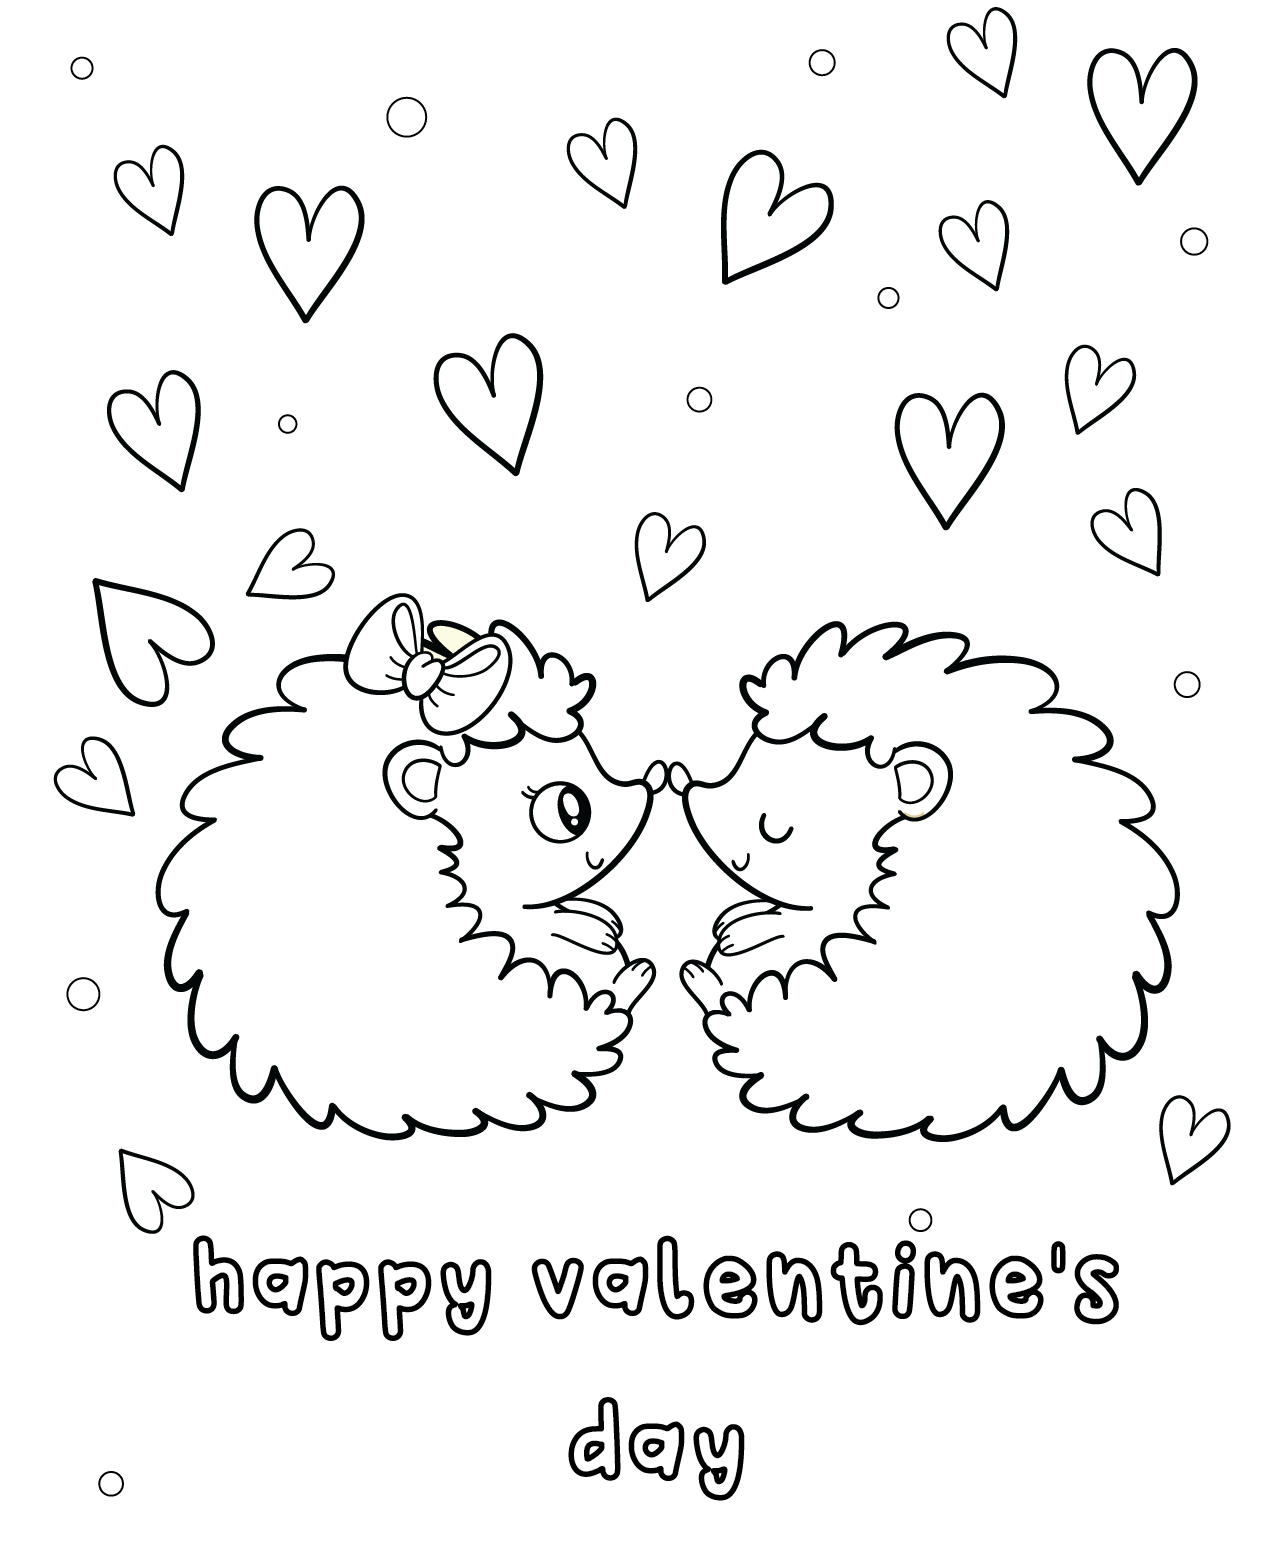 Hedgehog Valentines Day Coloring Page